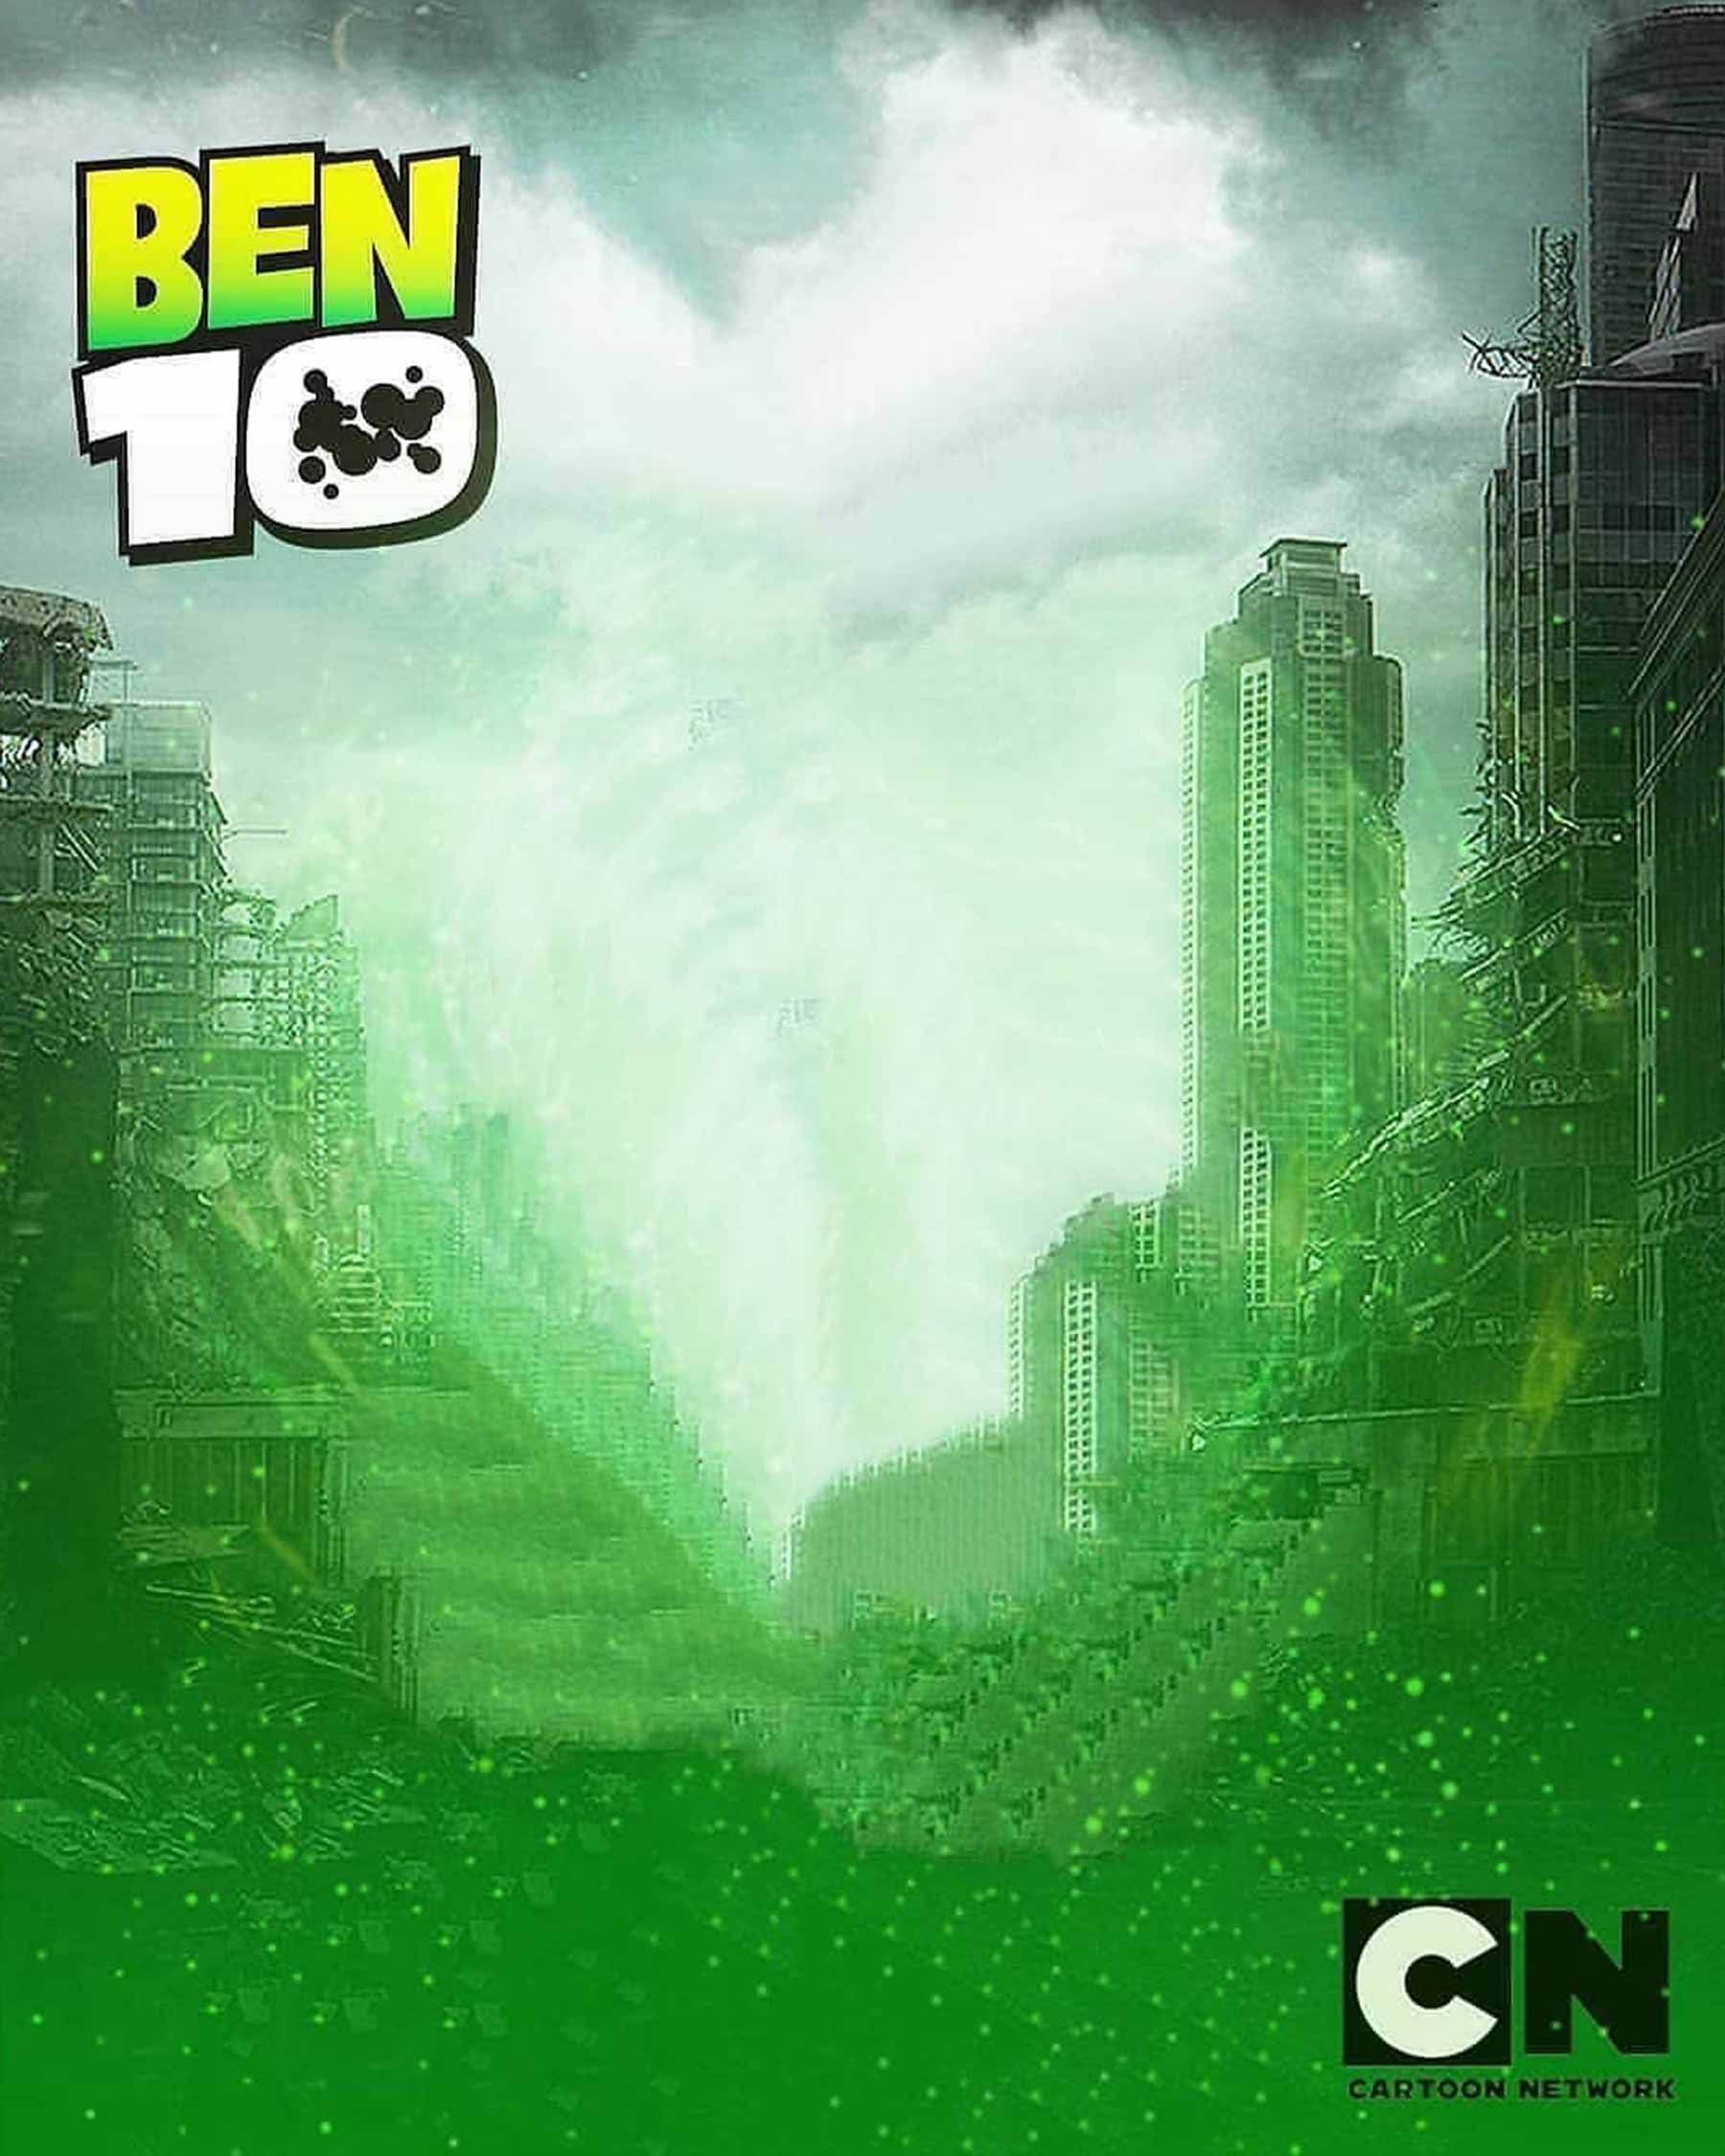 Ben 10 Snapseed Background Free Stock Image [ Download ]